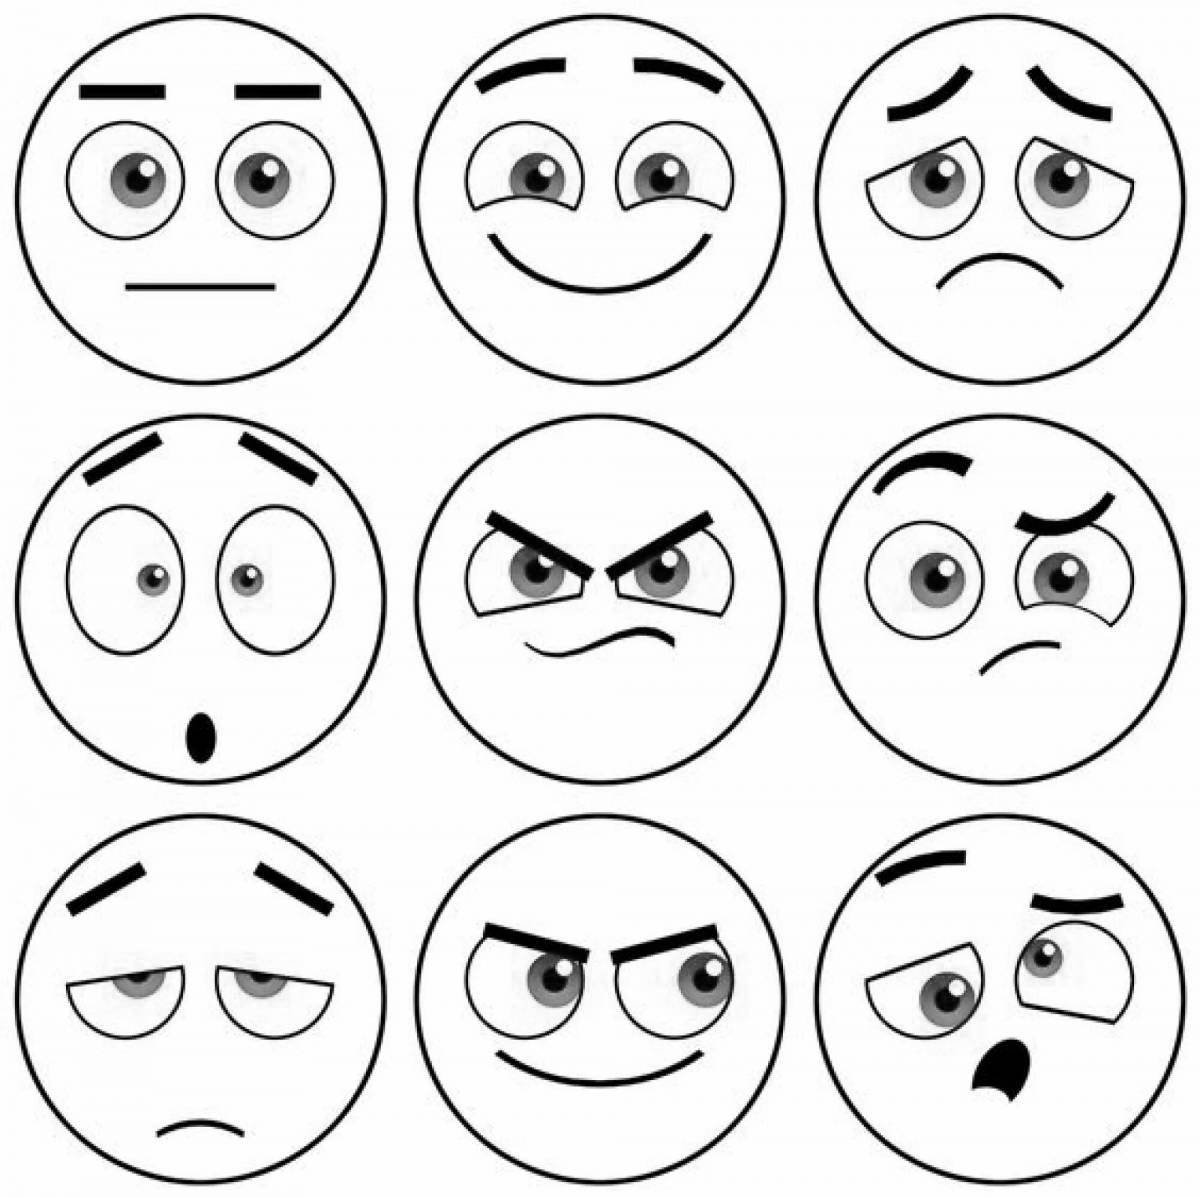 Friendly human emotion coloring book